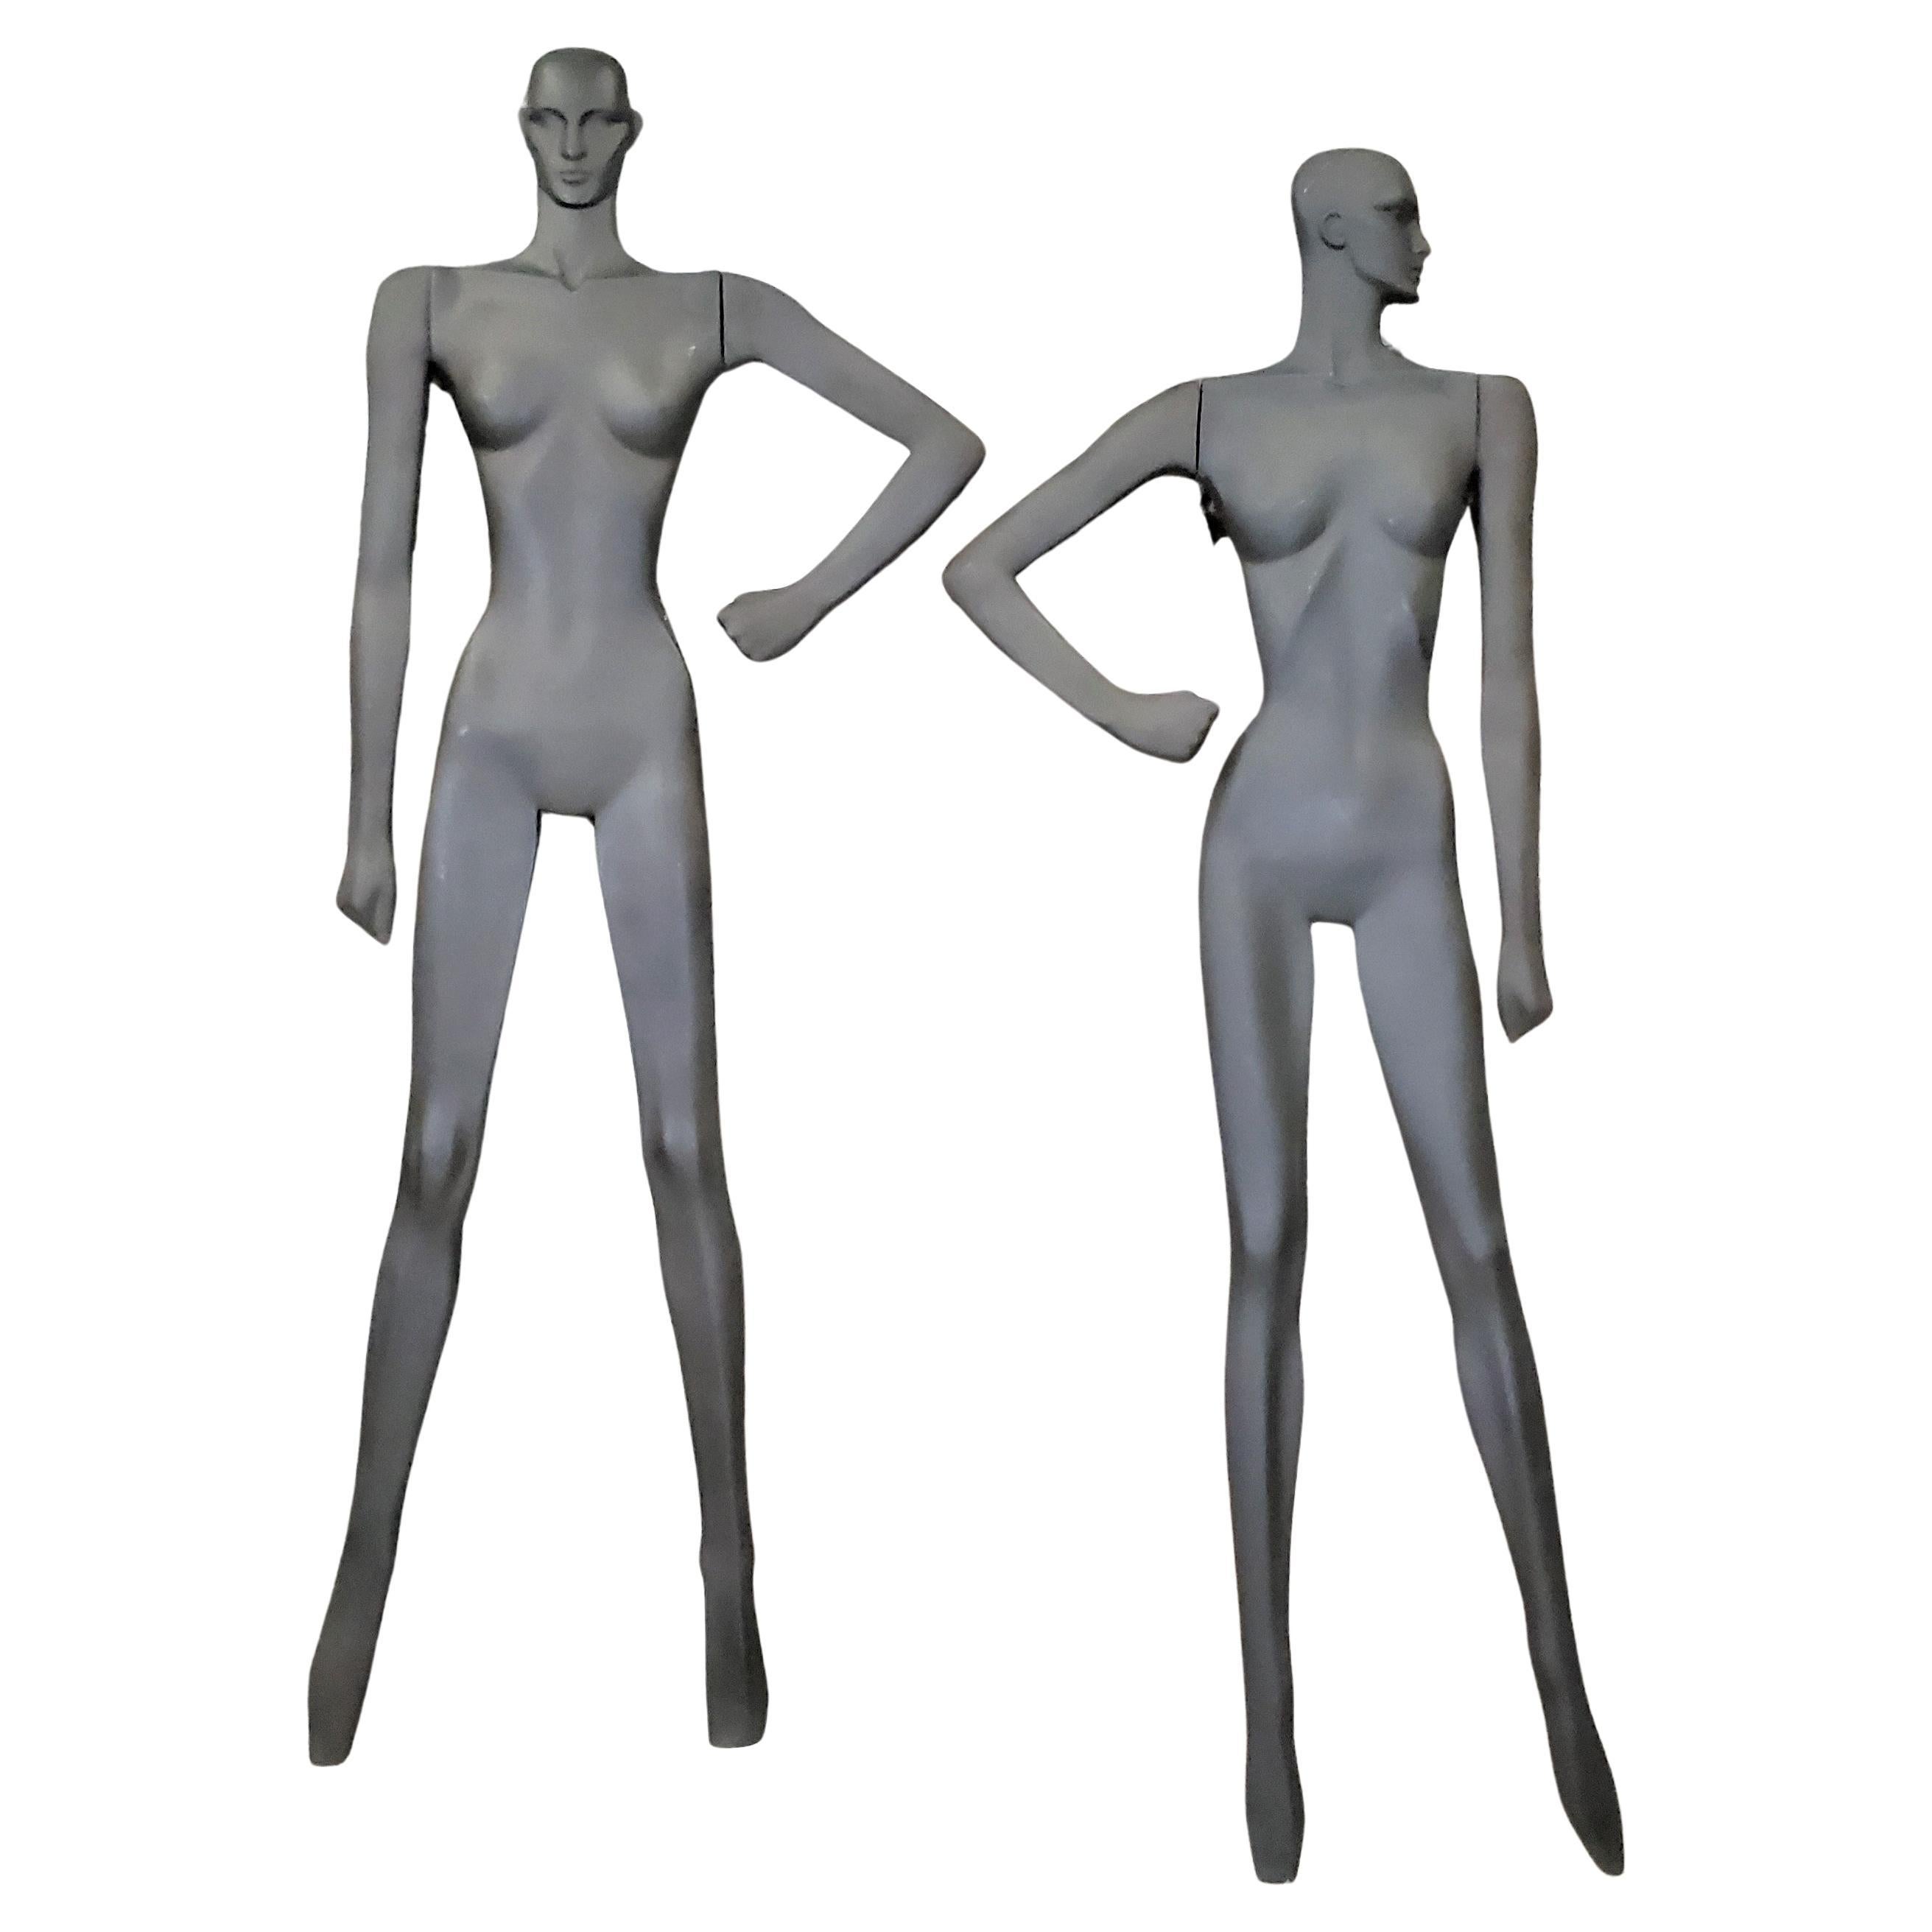 Pair of Vintage Stylized Nude Female Wall Mounted Sculptures or Manequins For Sale